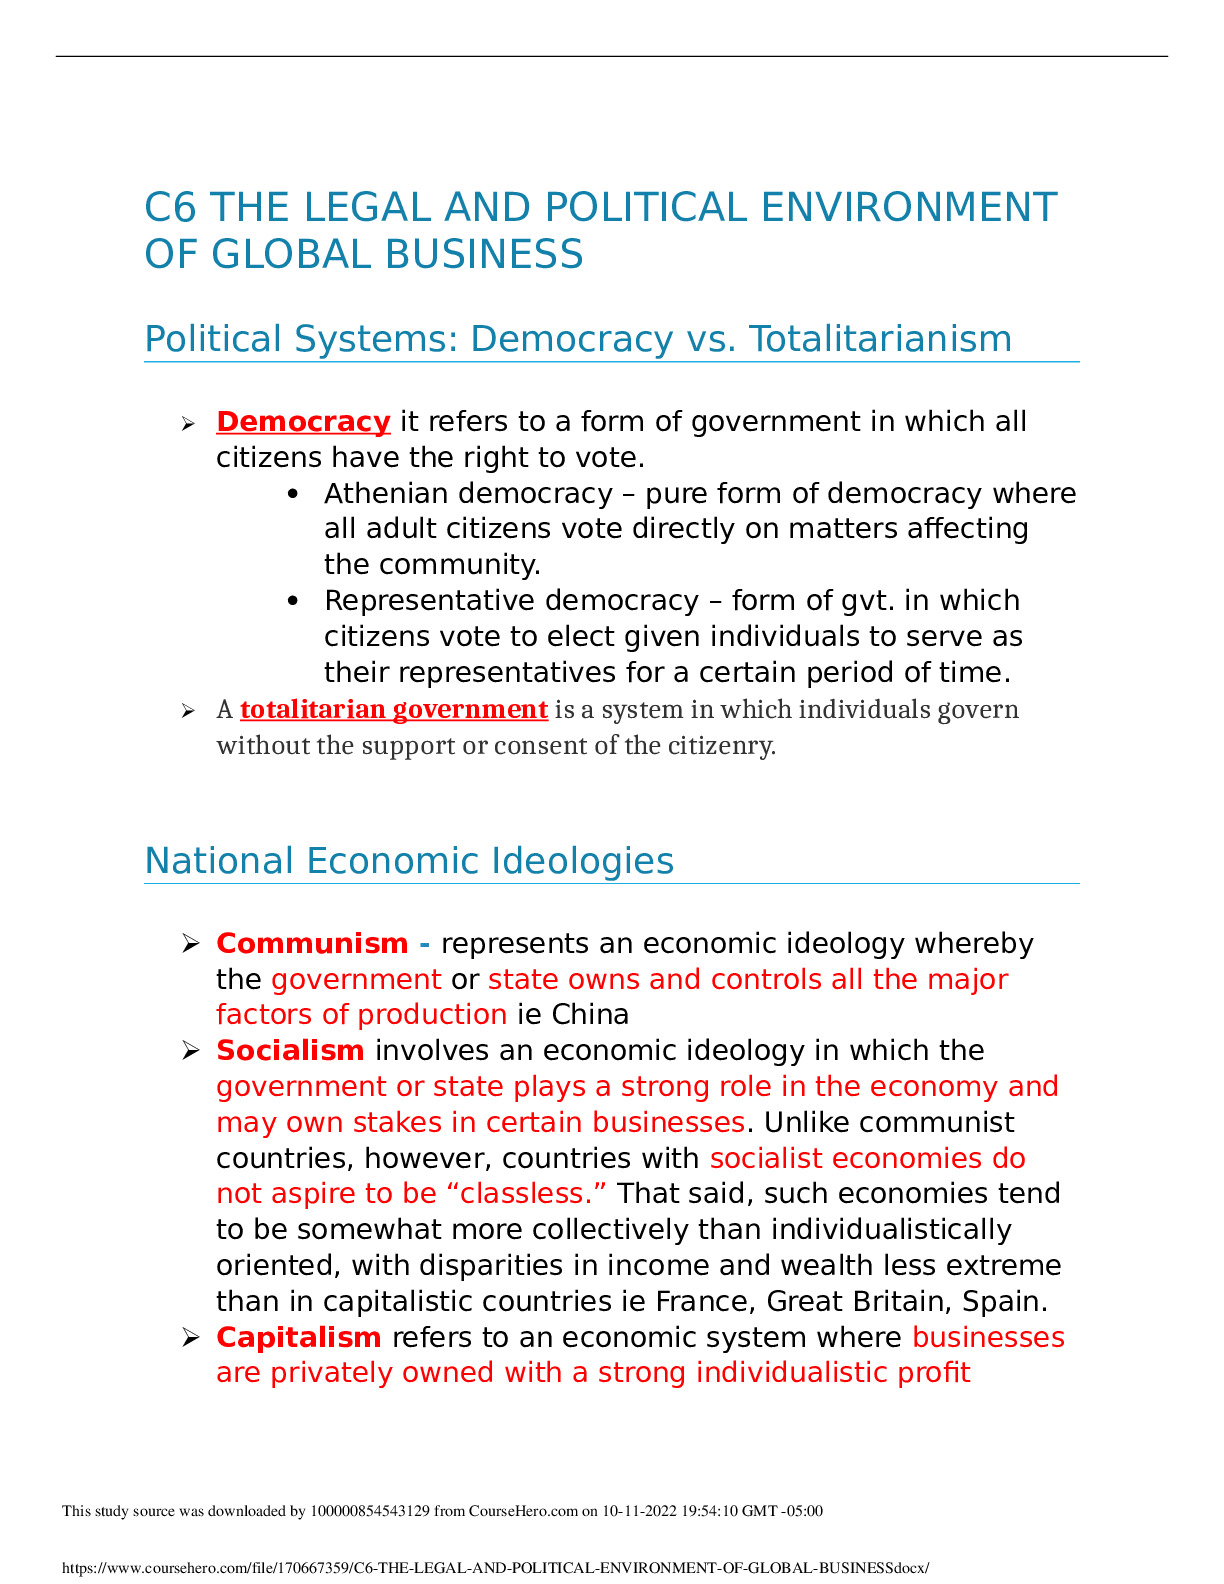 C6_THE_LEGAL_AND_POLITICAL_ENVIRONMENT_OF_GLOBAL_BUSINESS.docx